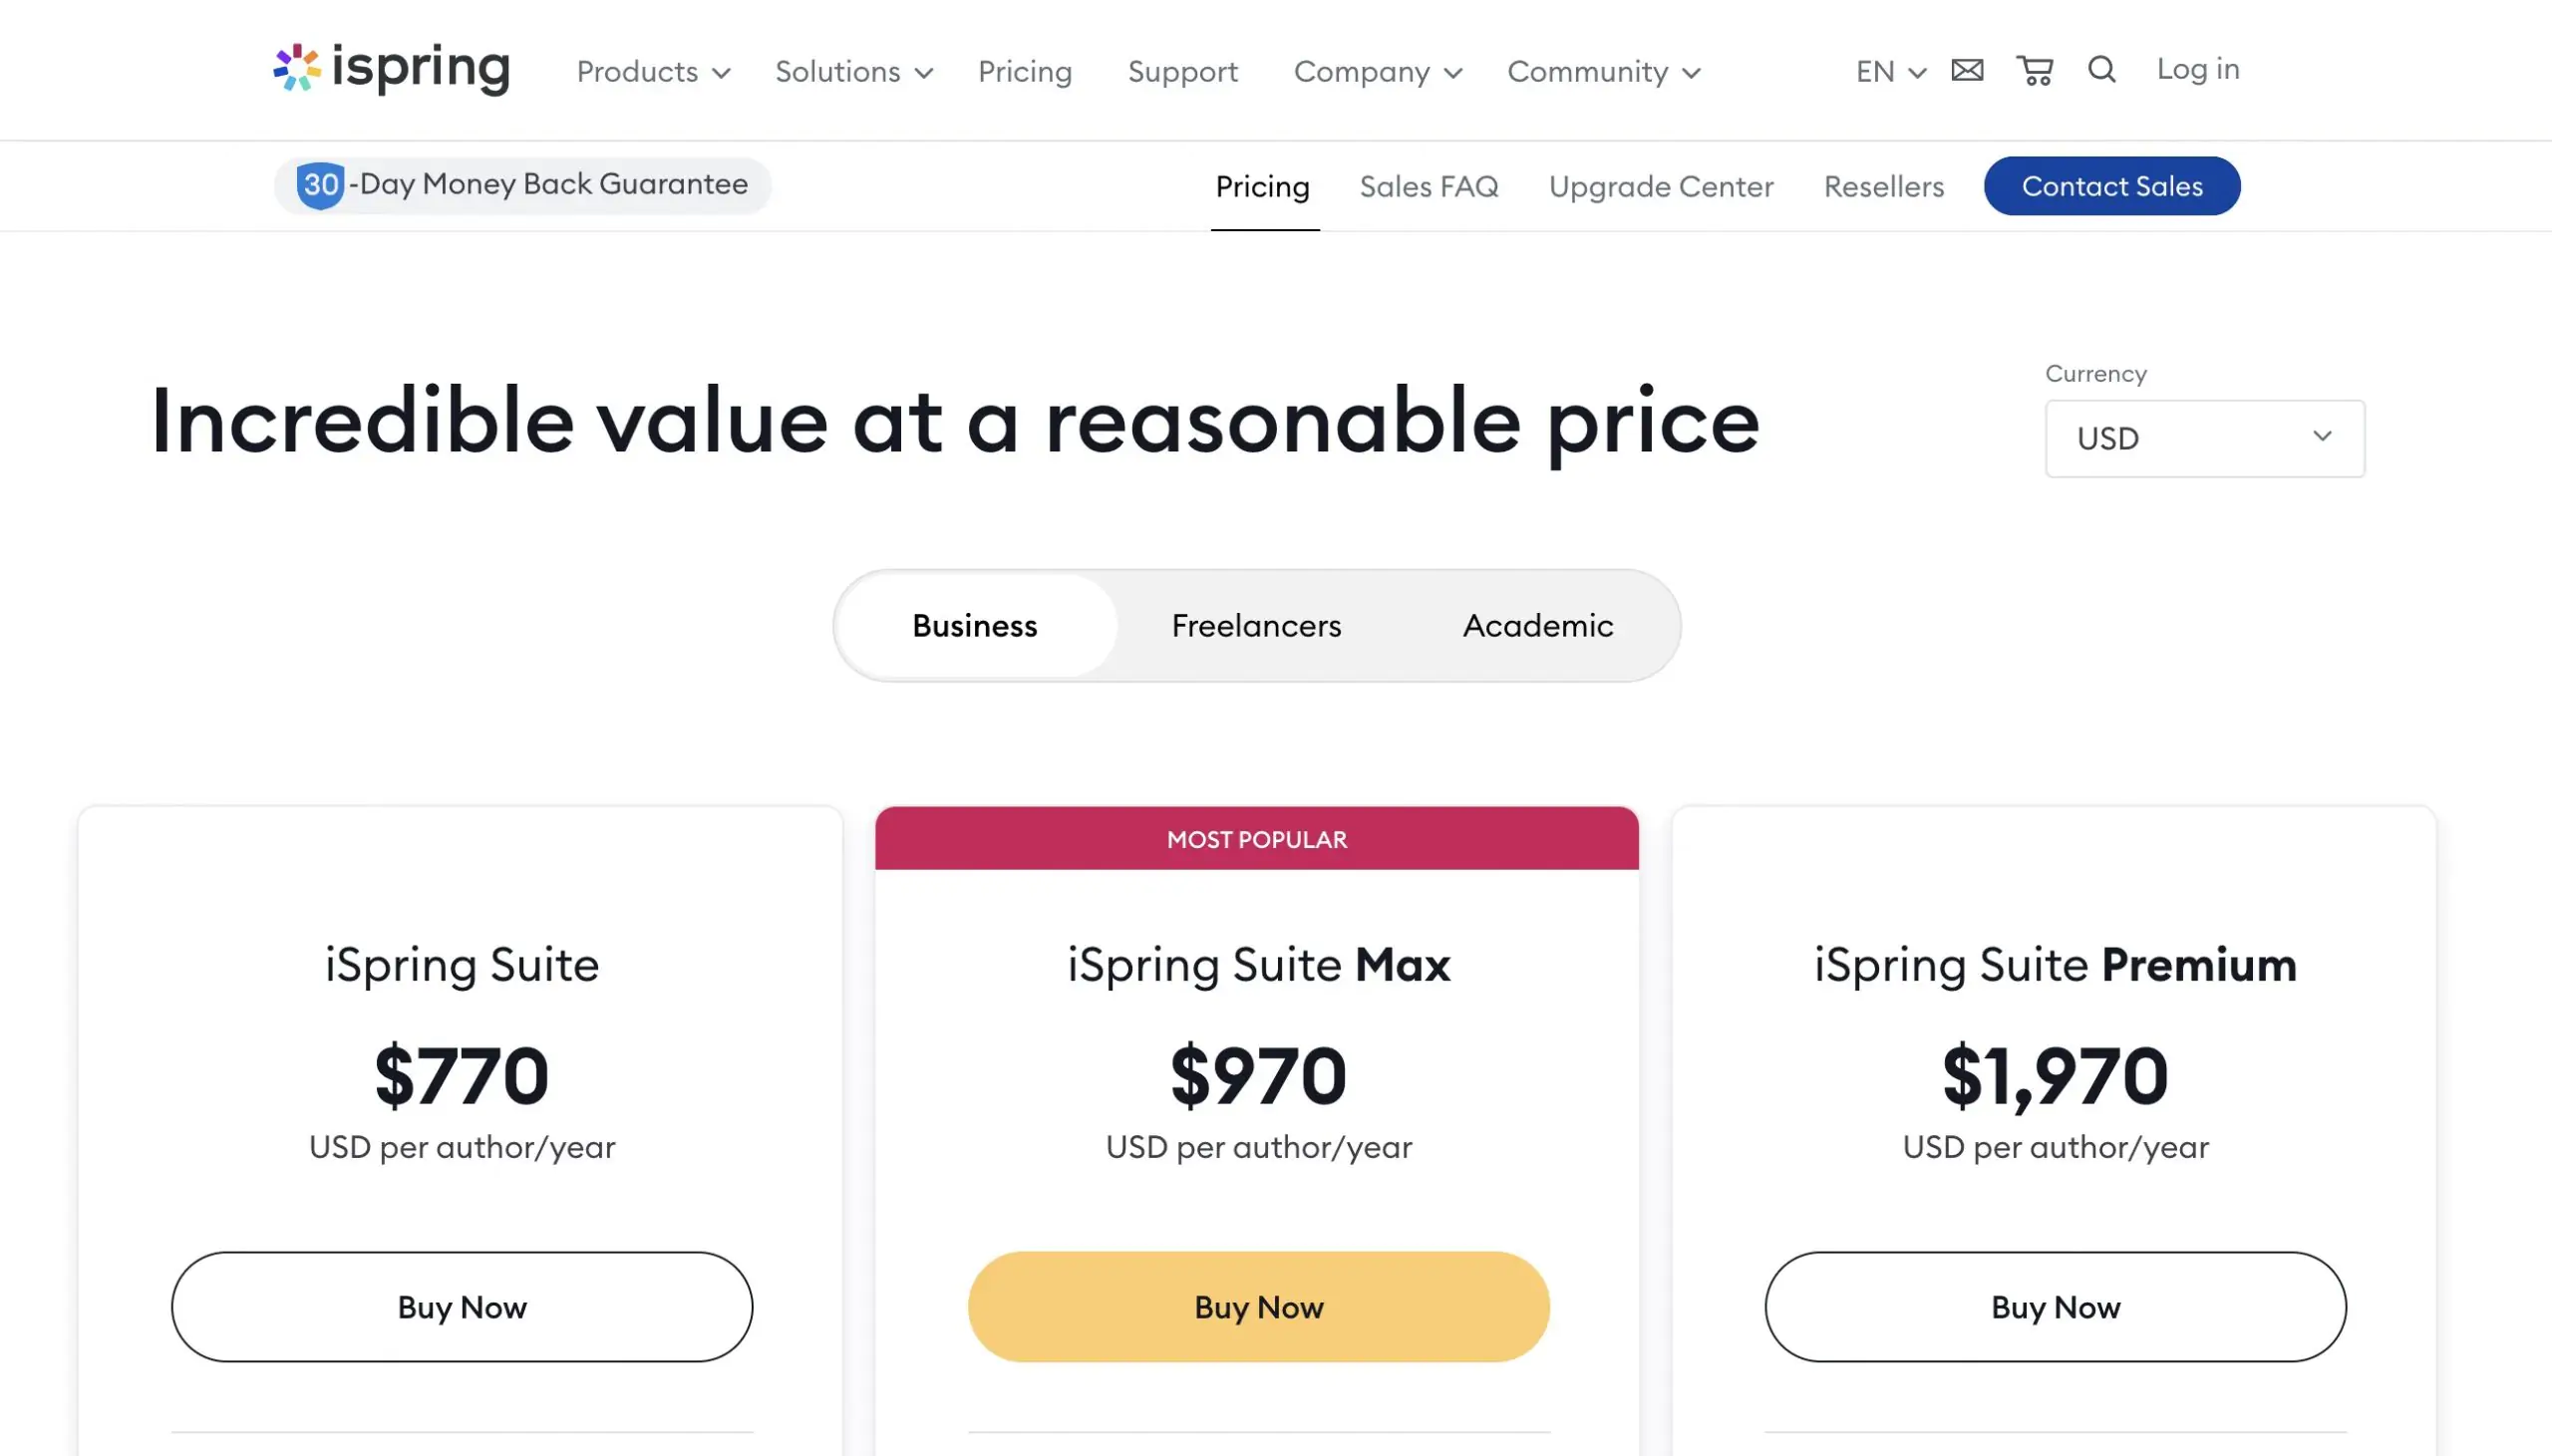 Pricing for iSpring Suite